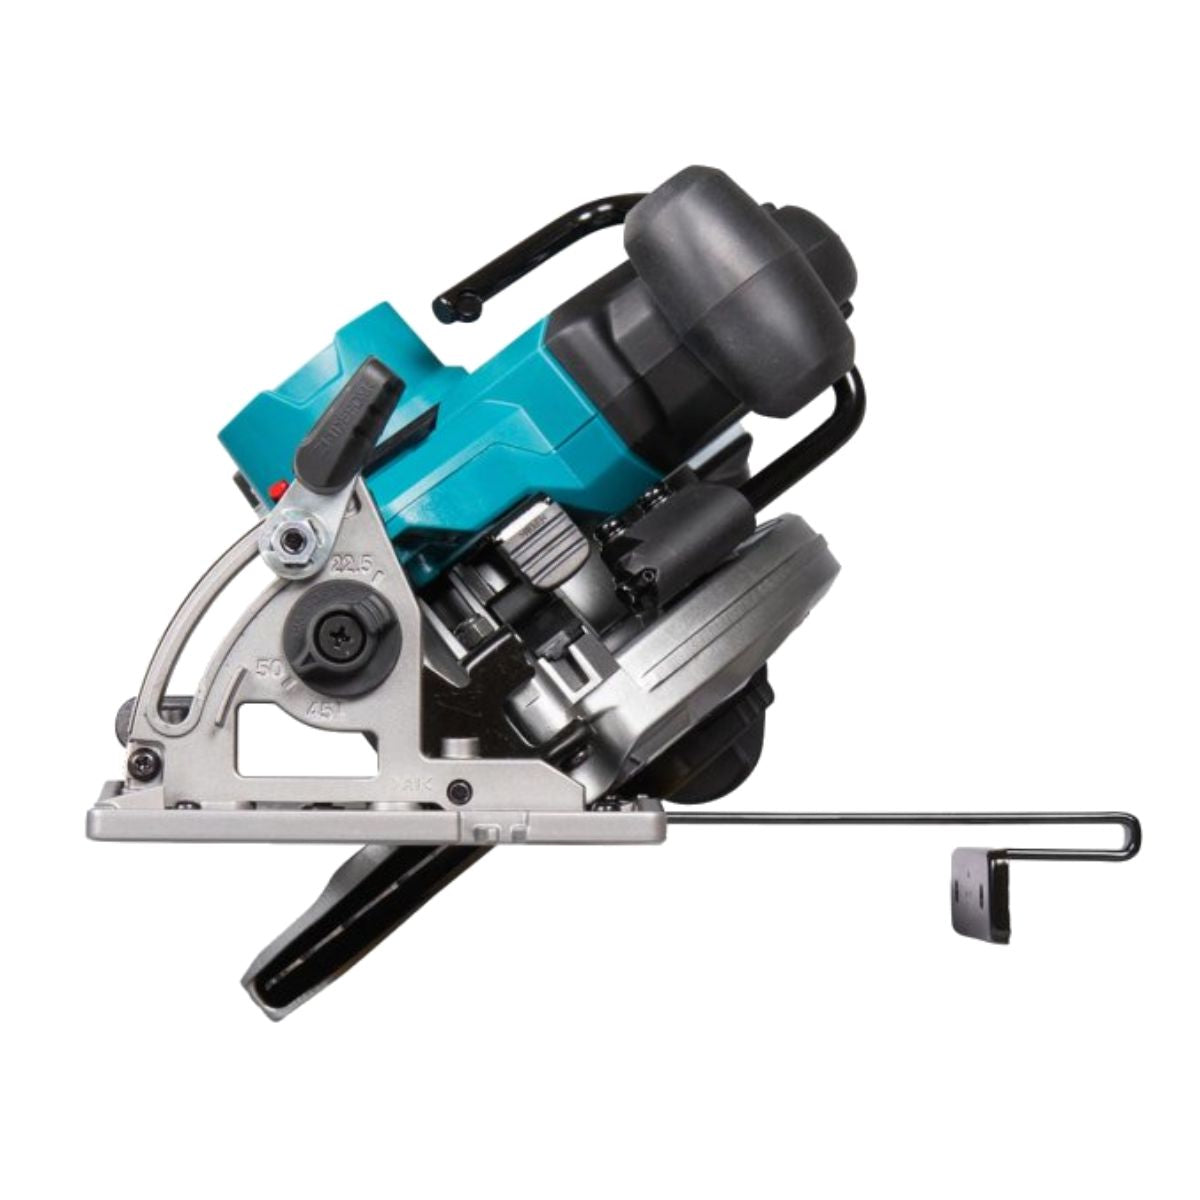 Makita HS012GZ 40V Brushless 165mm Circular Saw With 1 x 2.5Ah Battery & Charger